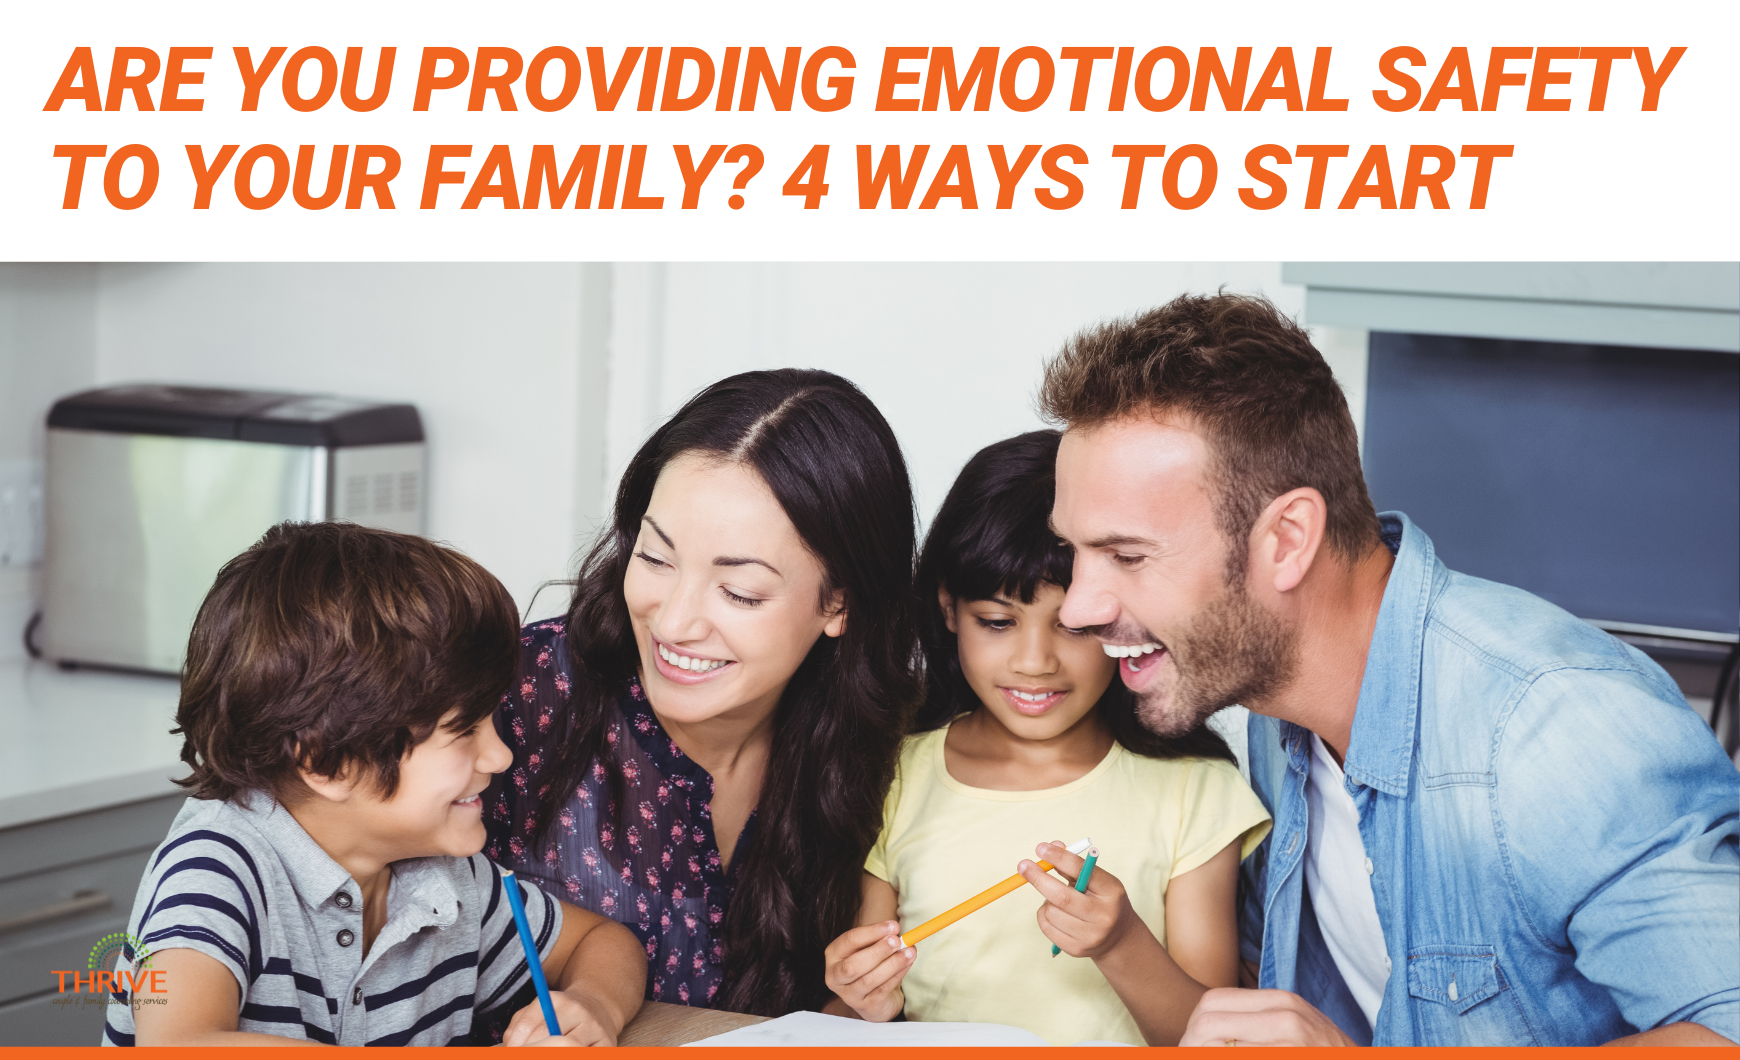 Orange text that reads "Are You Providing Emotional Safety to Your Family? 4 Ways to Start" above a photo of a family - from left to right there is a small boy, an adult woman, a small girl, and an adult man. They are all smiling.